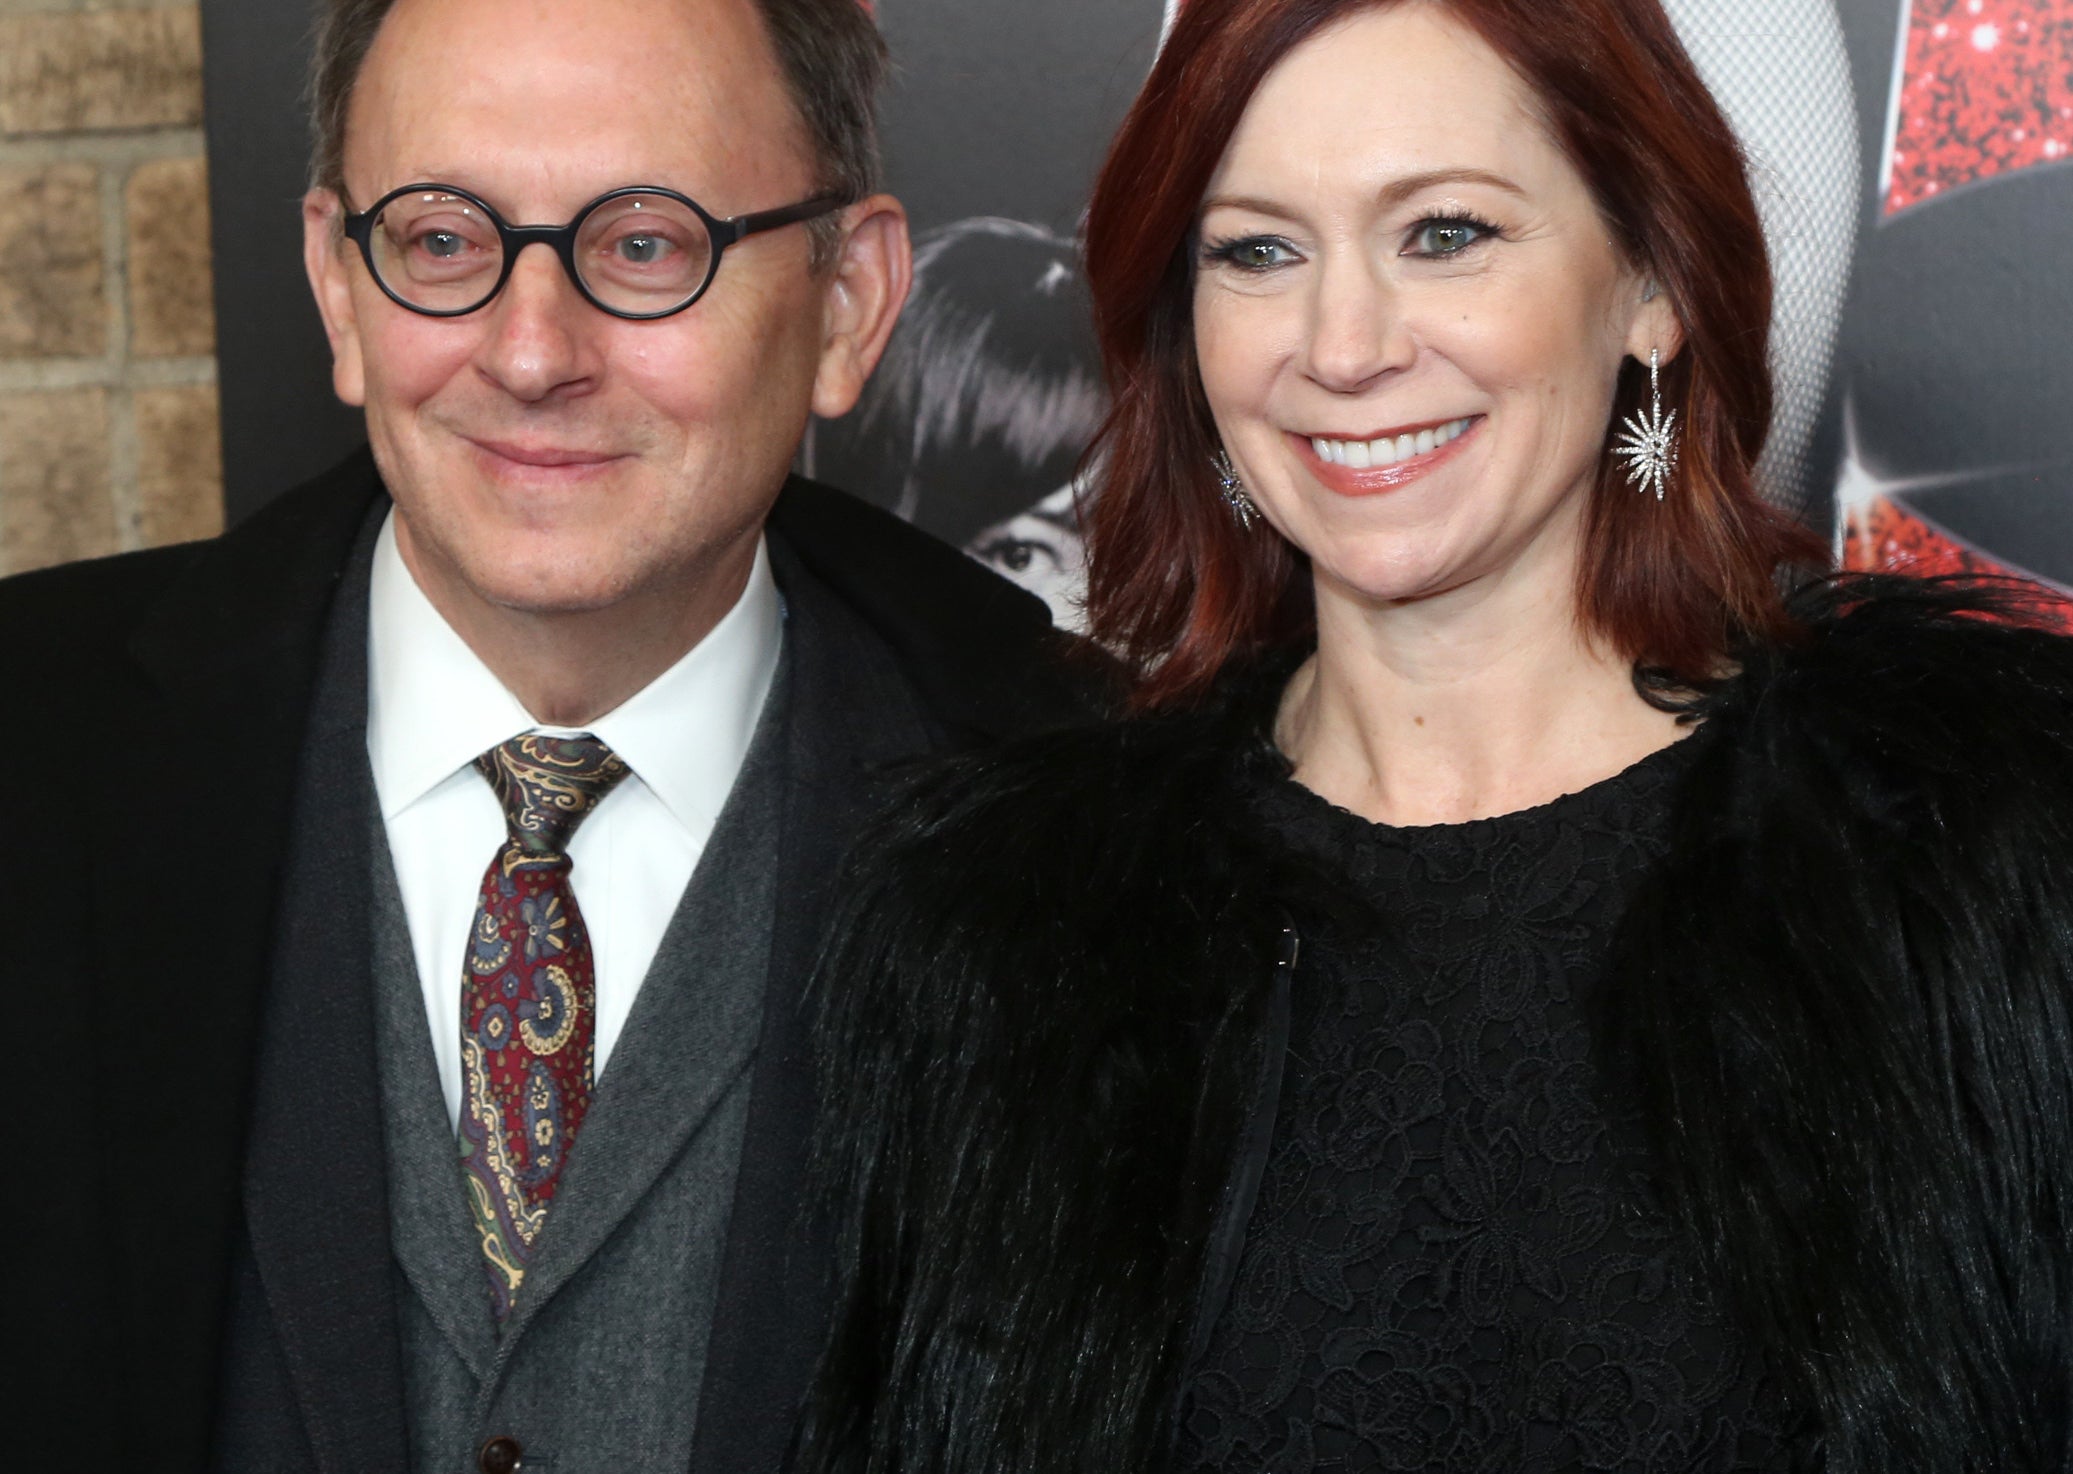 Michael Emerson and Carrie Preston smiling together